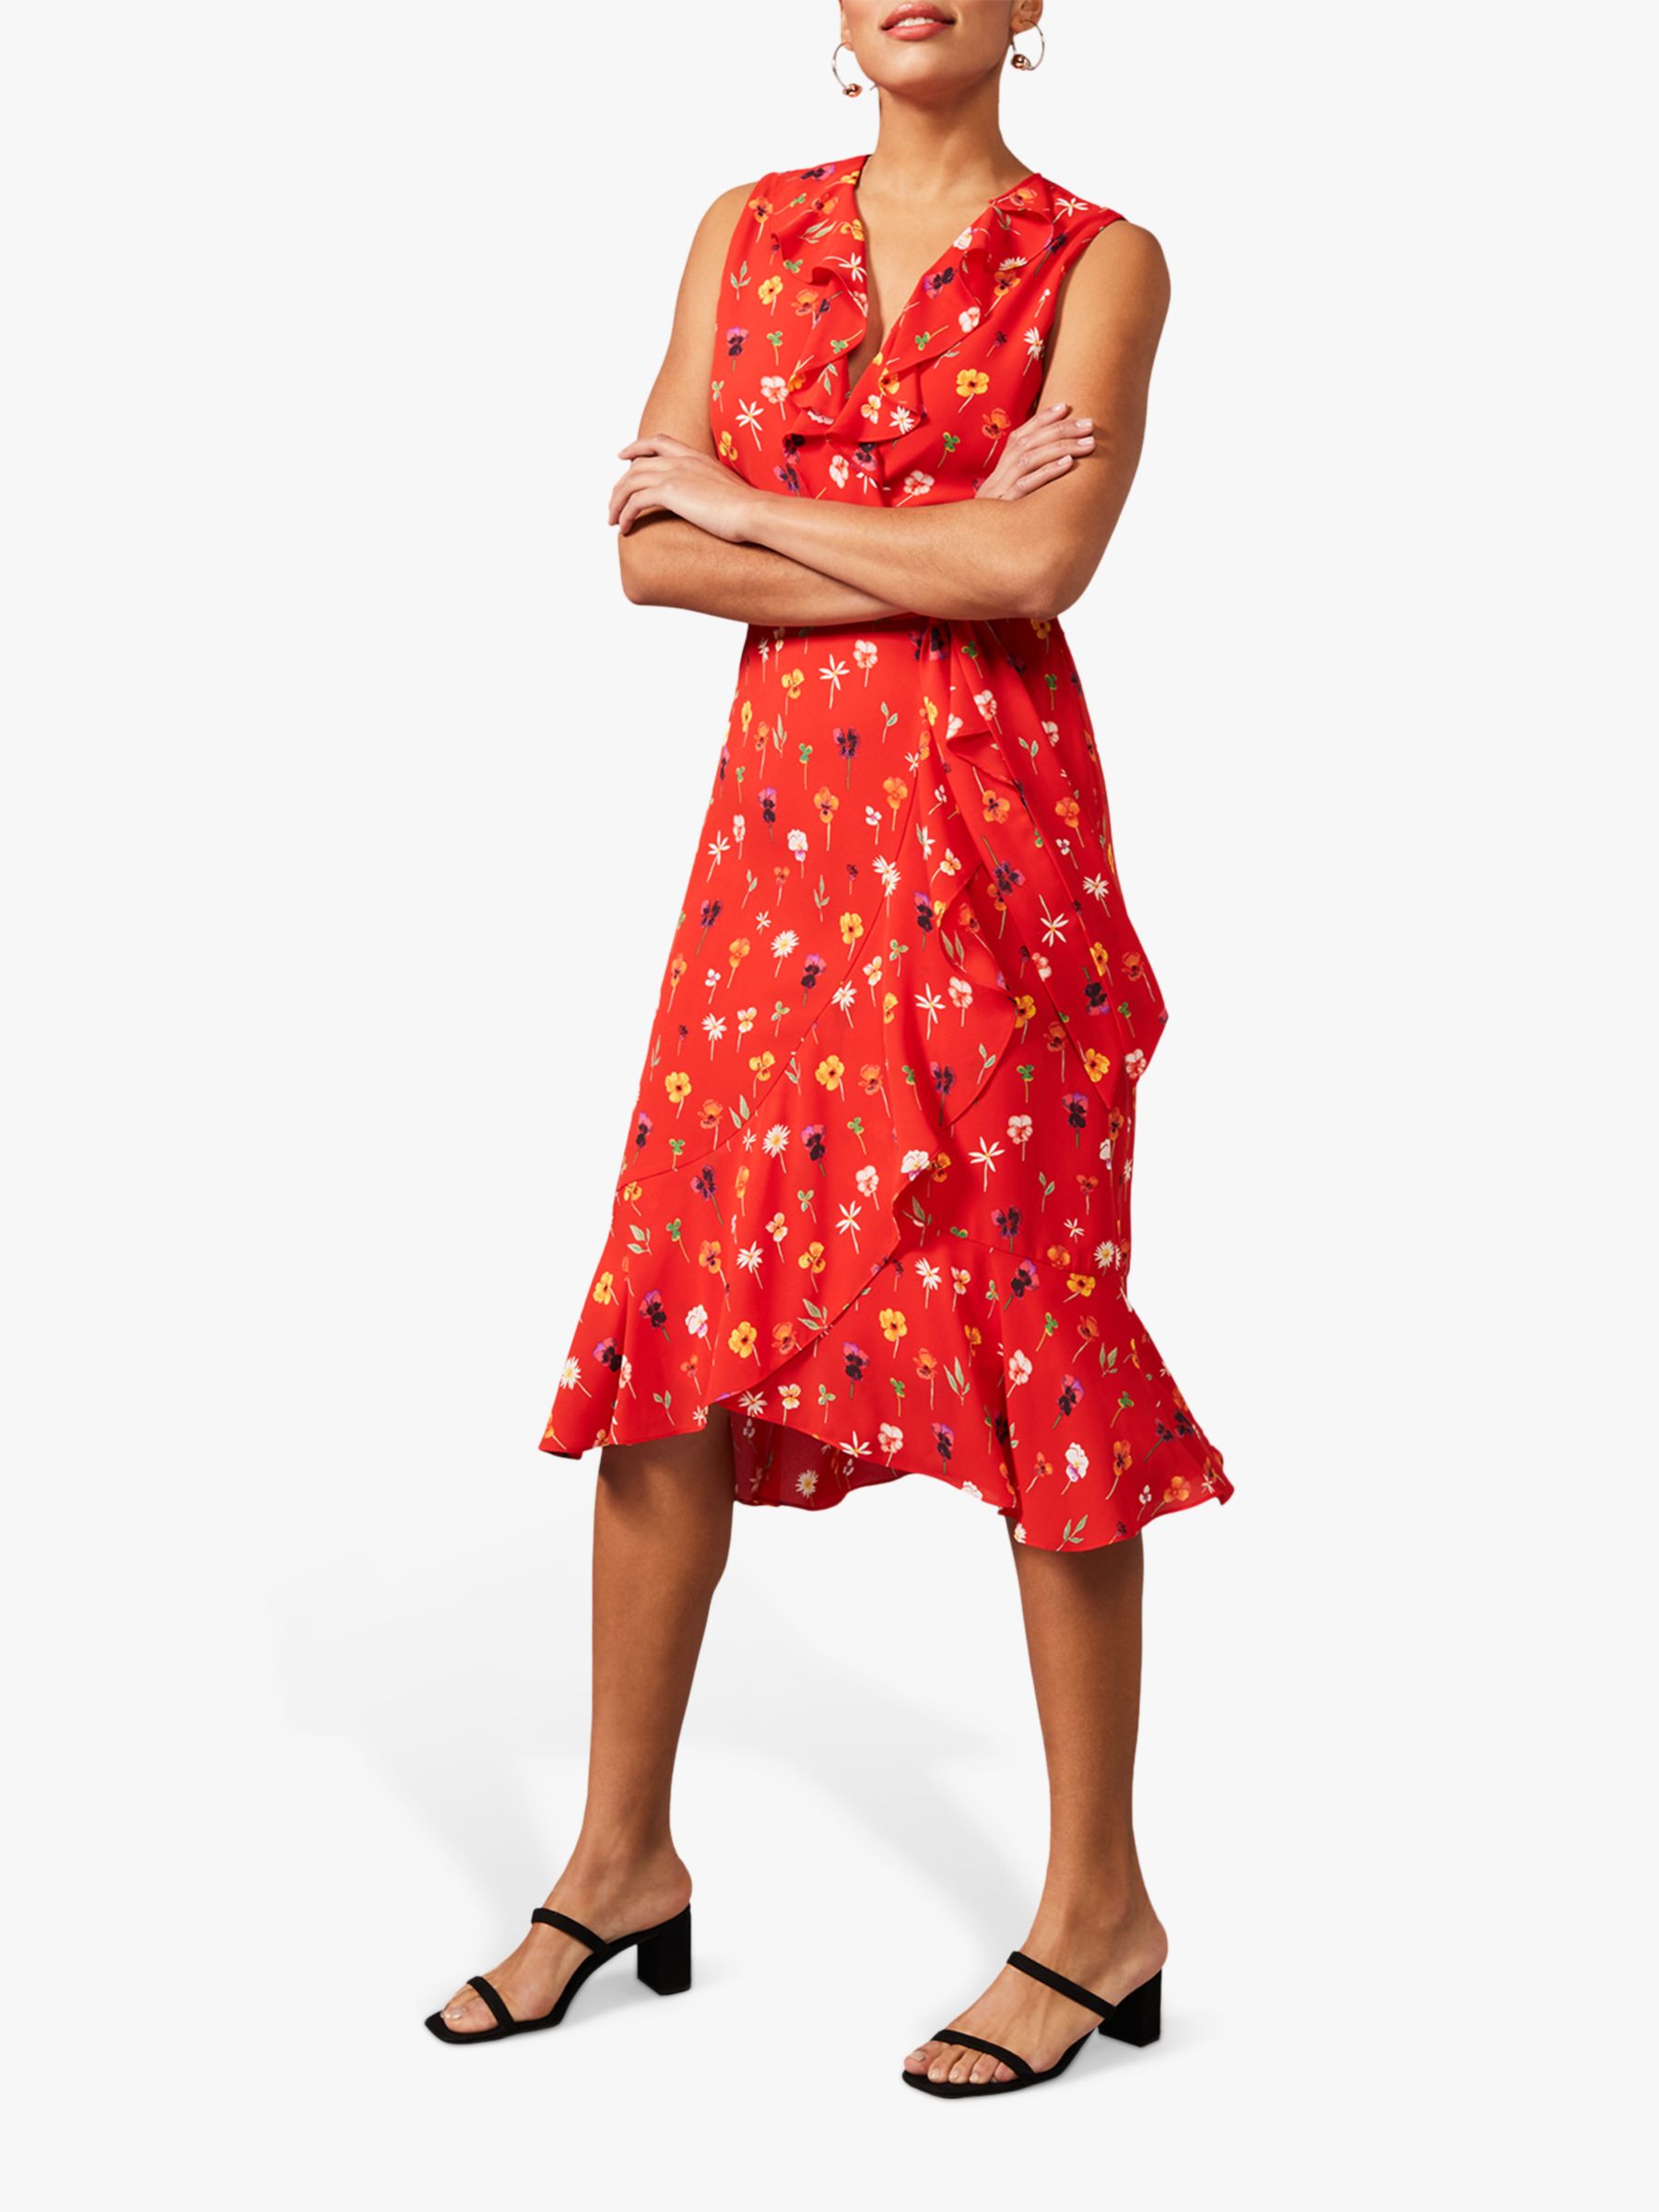 Phase Eight Alanna Ditsy Floral Print Dress, Fire/Multi, 6